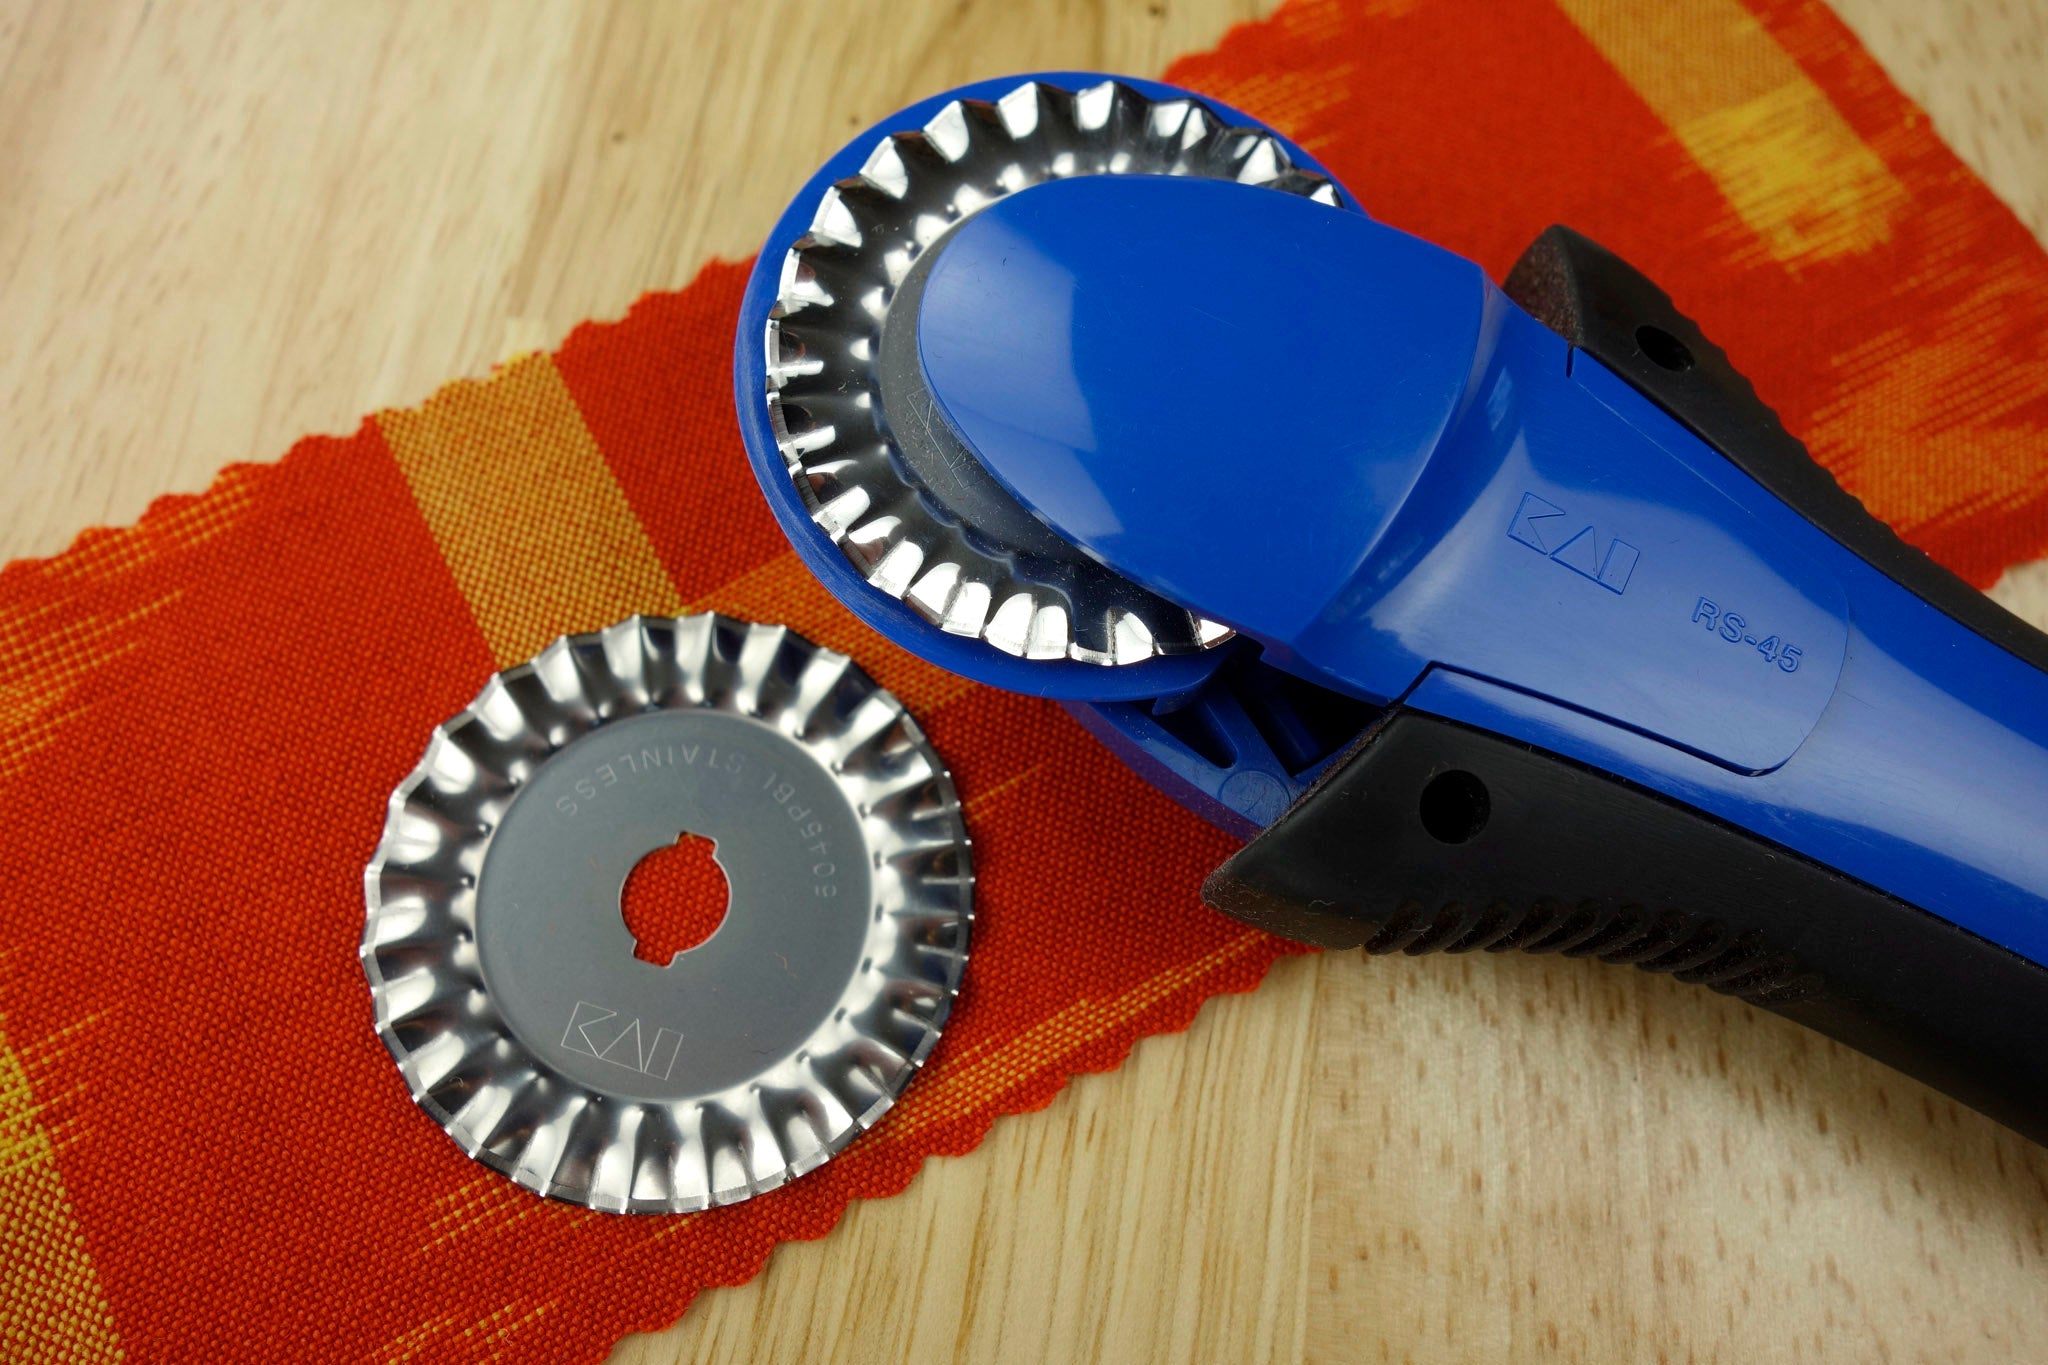 KAI rotary cutter with a pinking blade in the sewing studio of Patricia Belyea